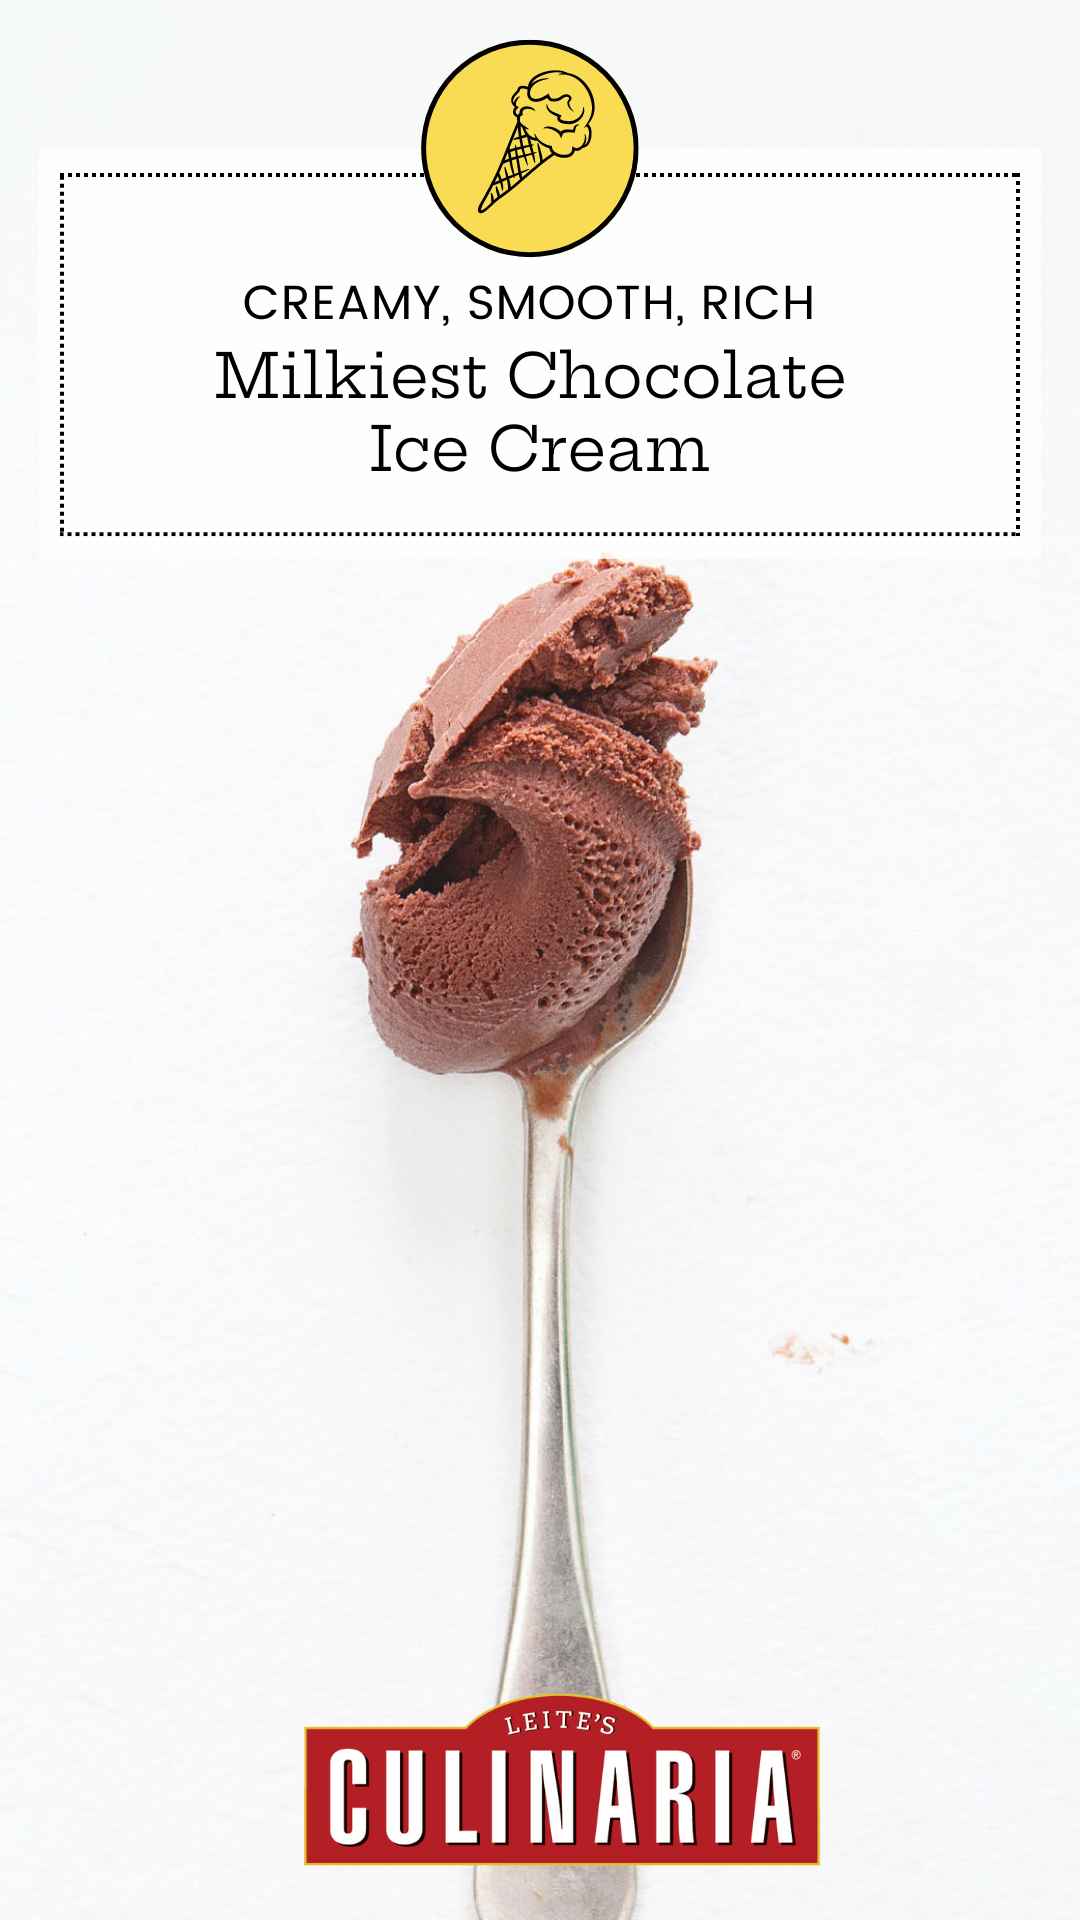 A scoop of chocolate ice cream on a silver spoon.